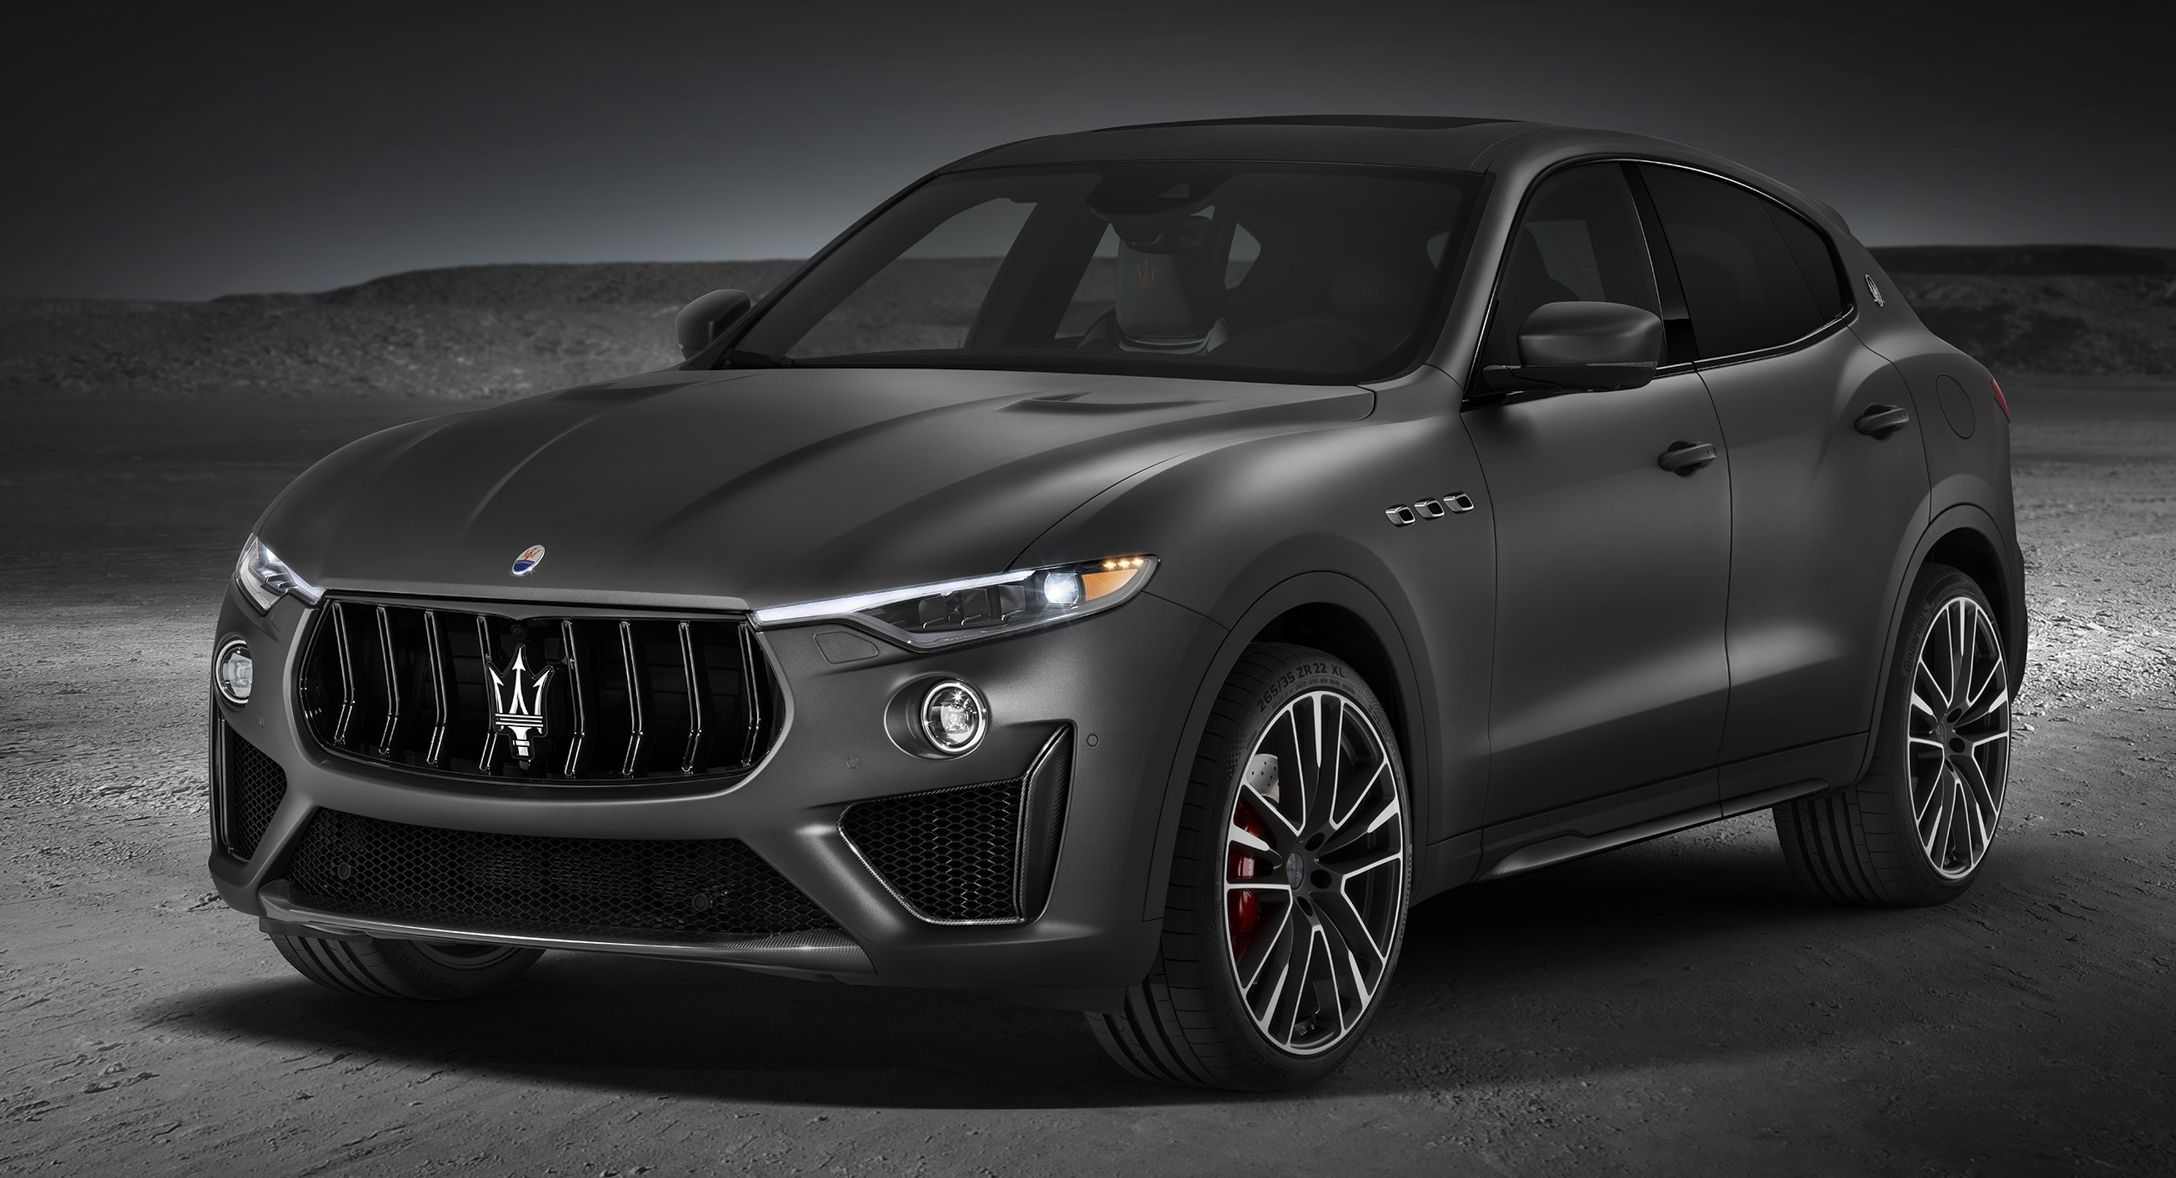 2018 Is There Any Meaningful Difference Between The Maserati Levante GTS And The Maserati Levante Trofeo?